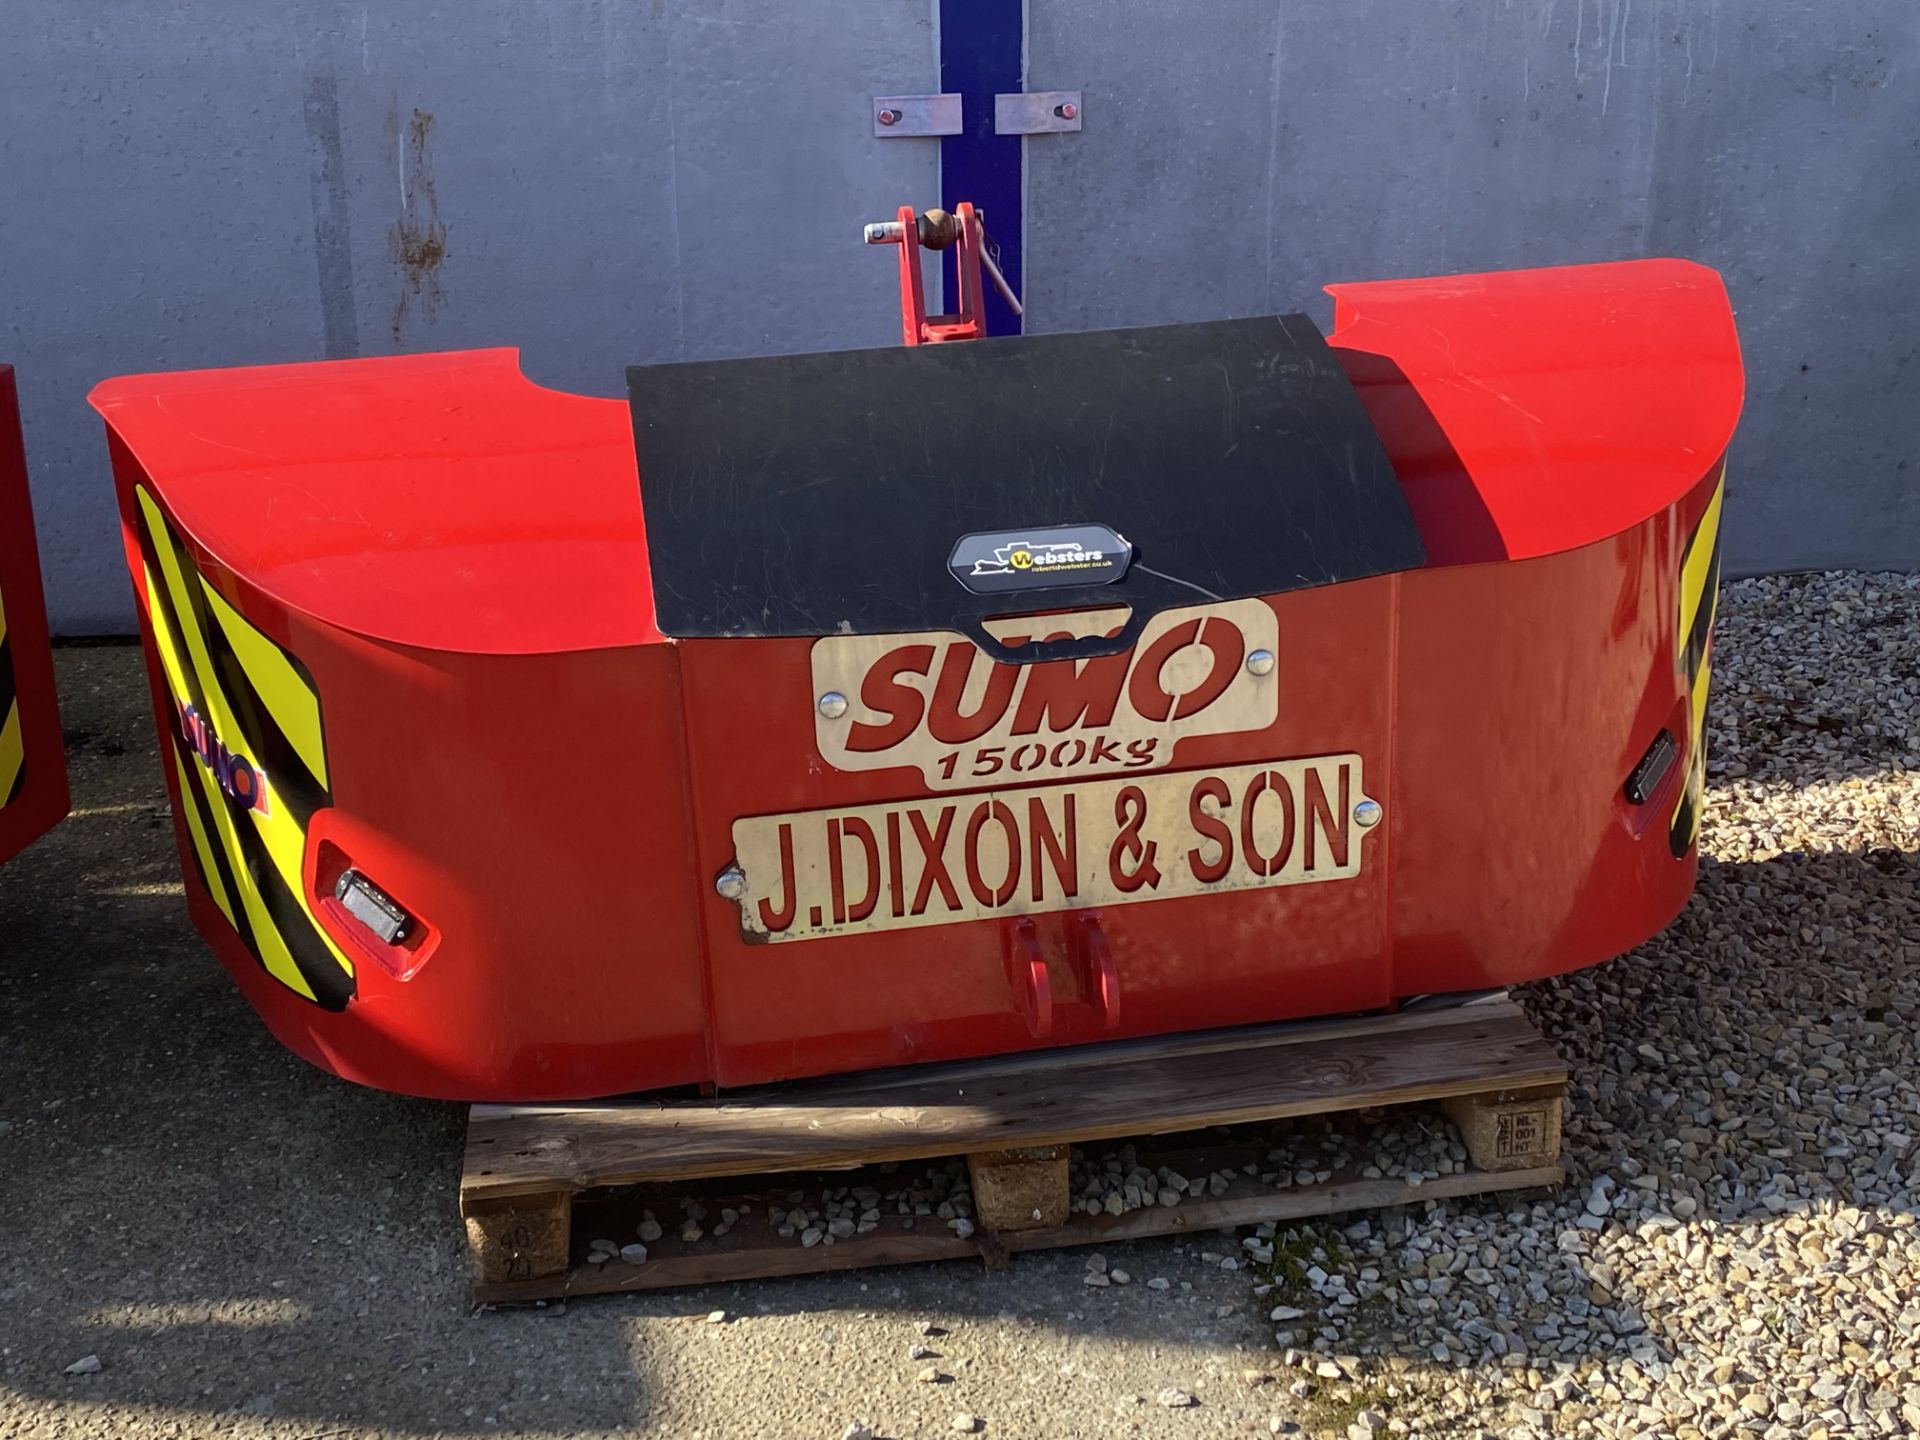 2019 Sumo 1500kgs front mounted Weight Block c/w tool box (to fit the above) - Image 2 of 4